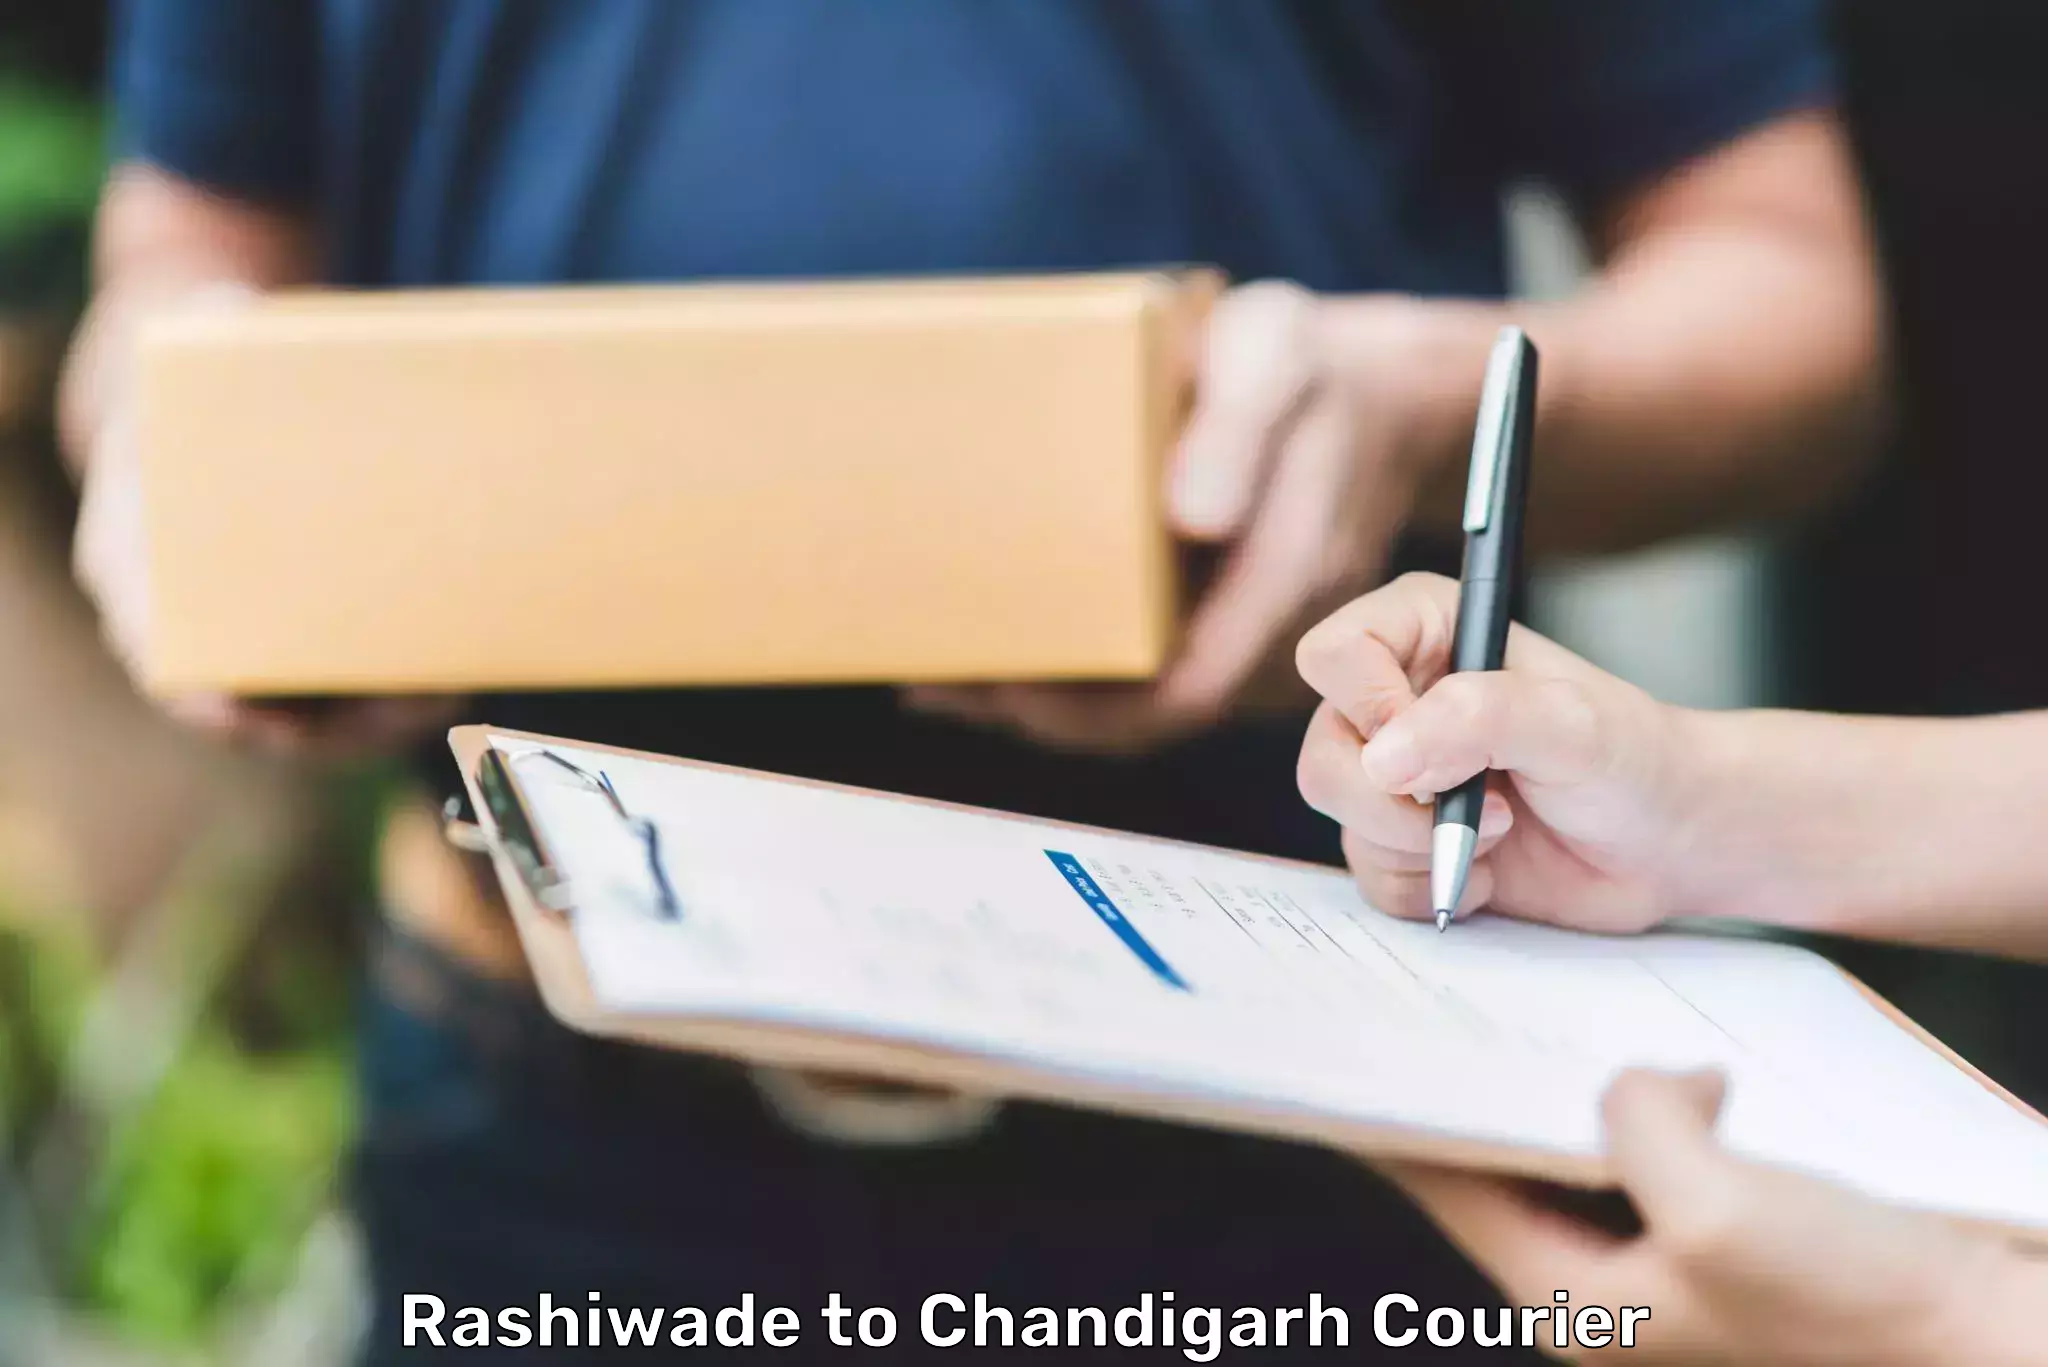 Courier service booking Rashiwade to Chandigarh